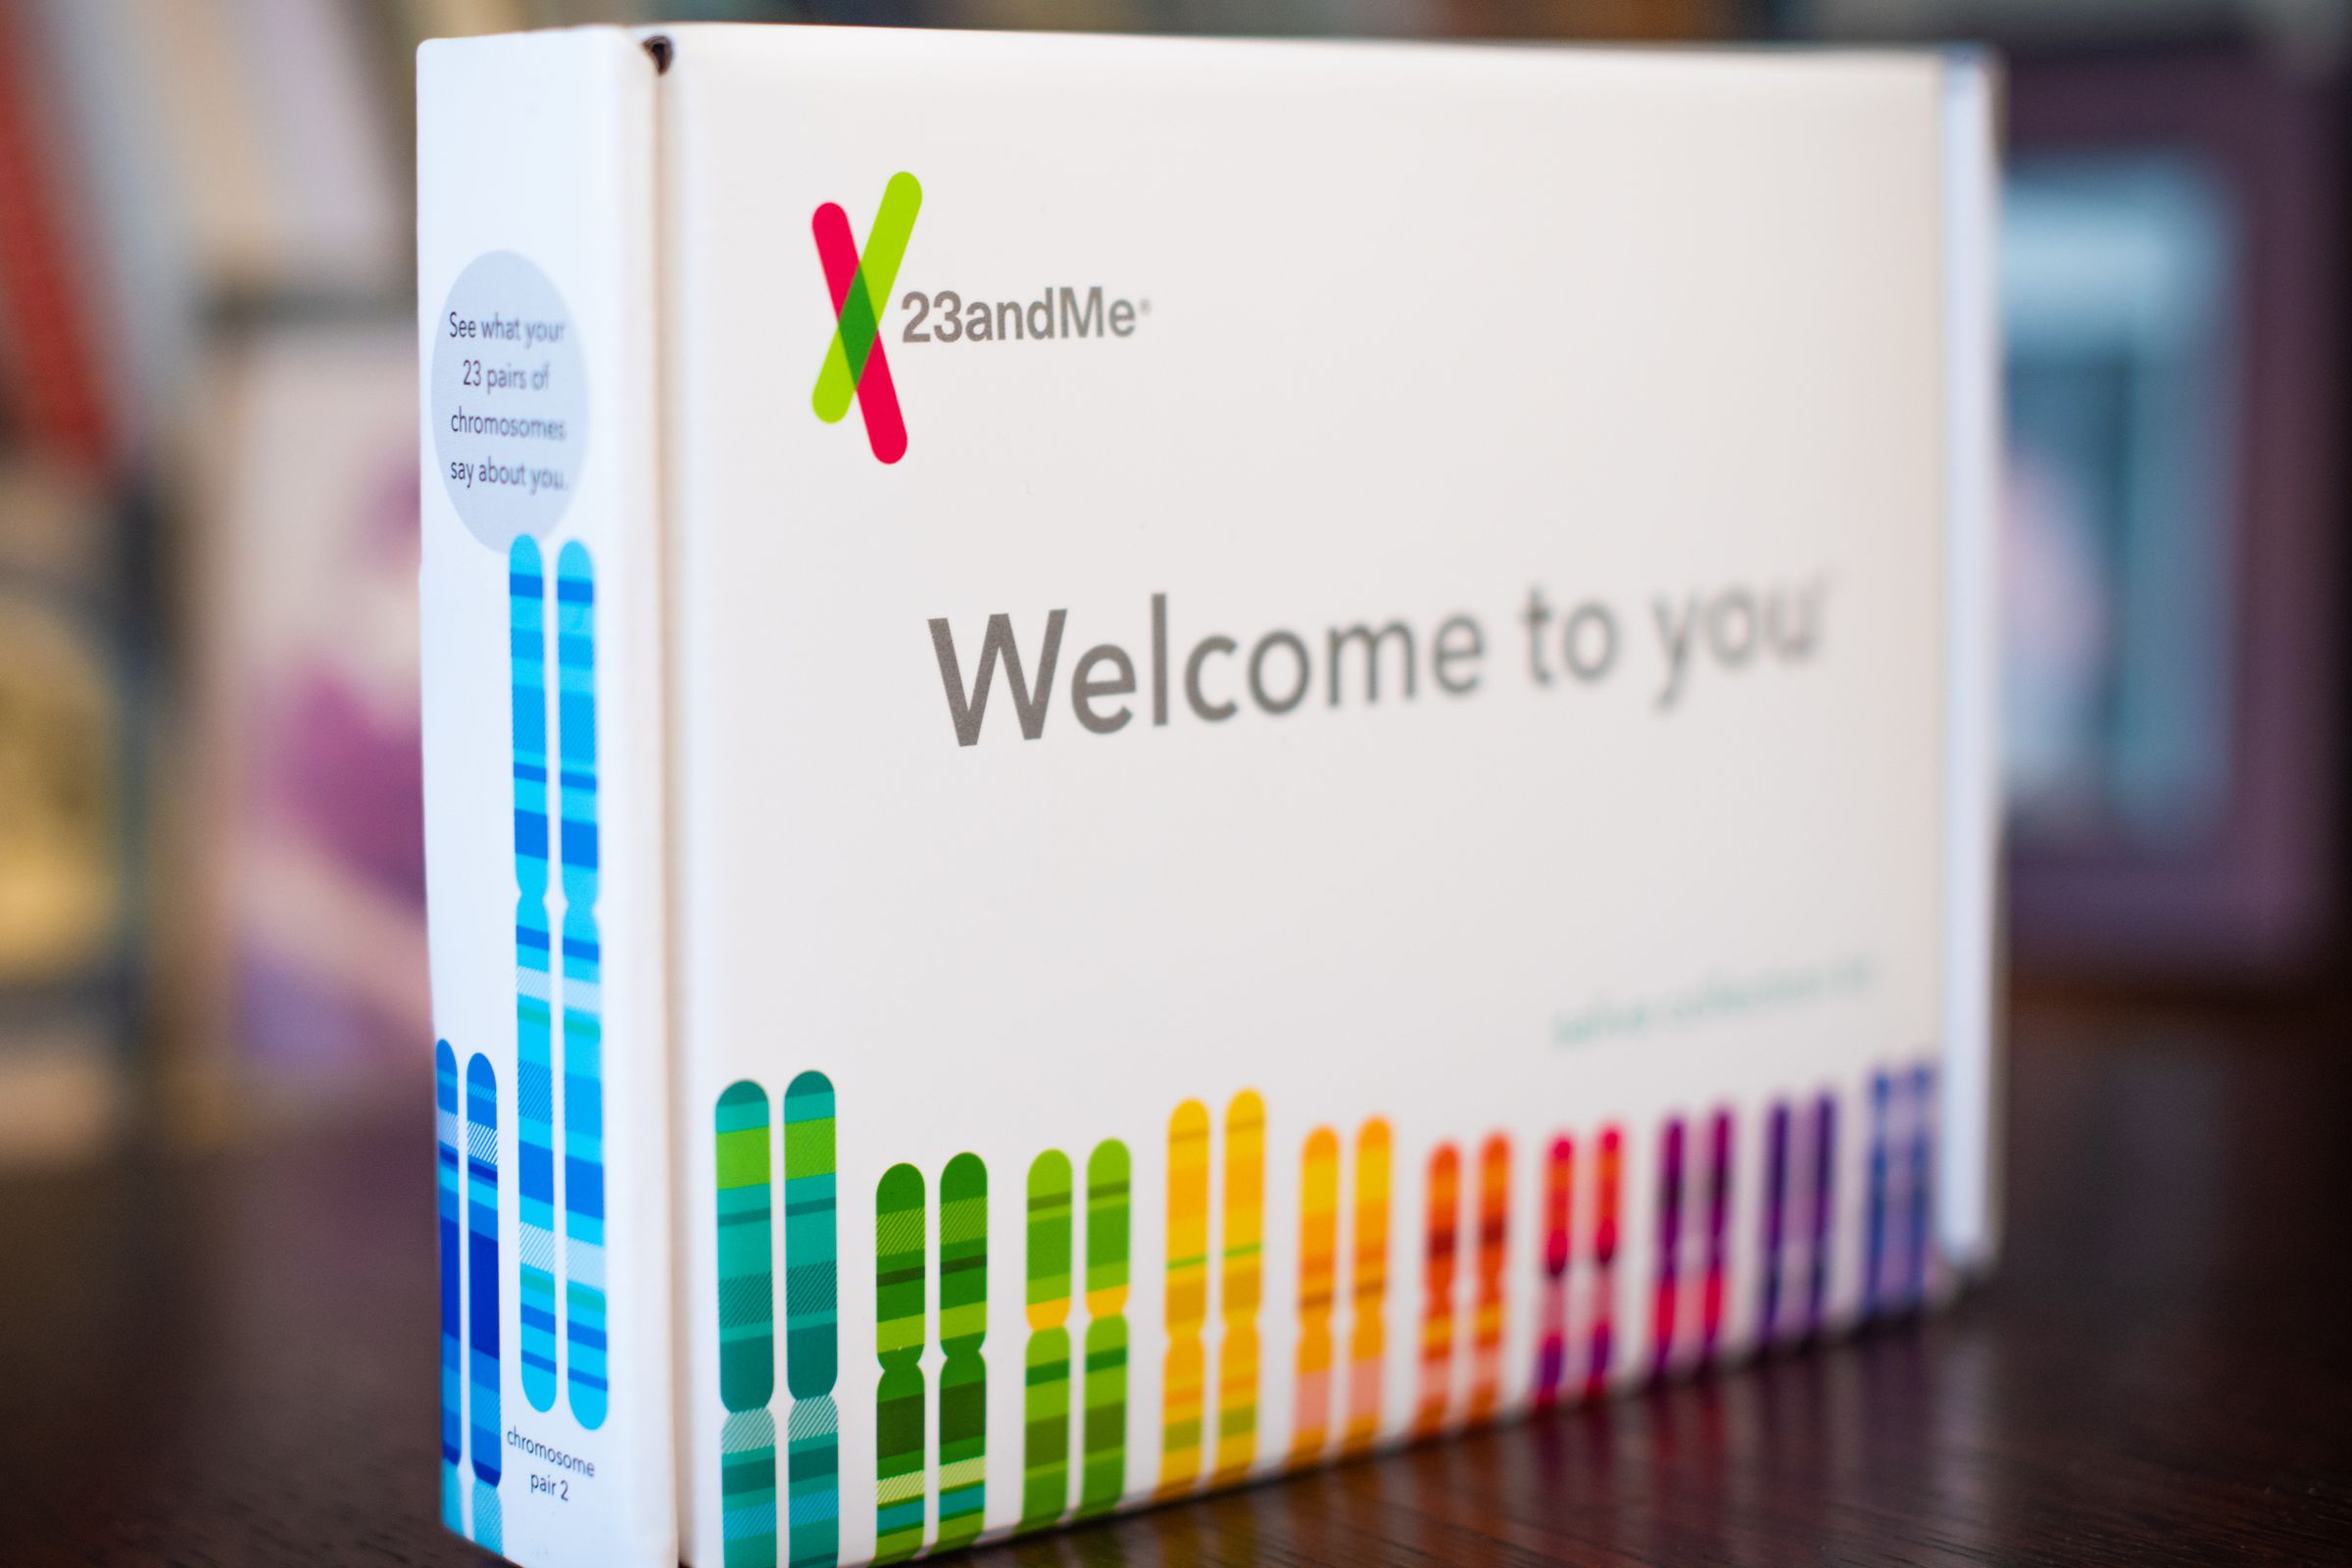 A photo showing a 23andMe DNA testing kit